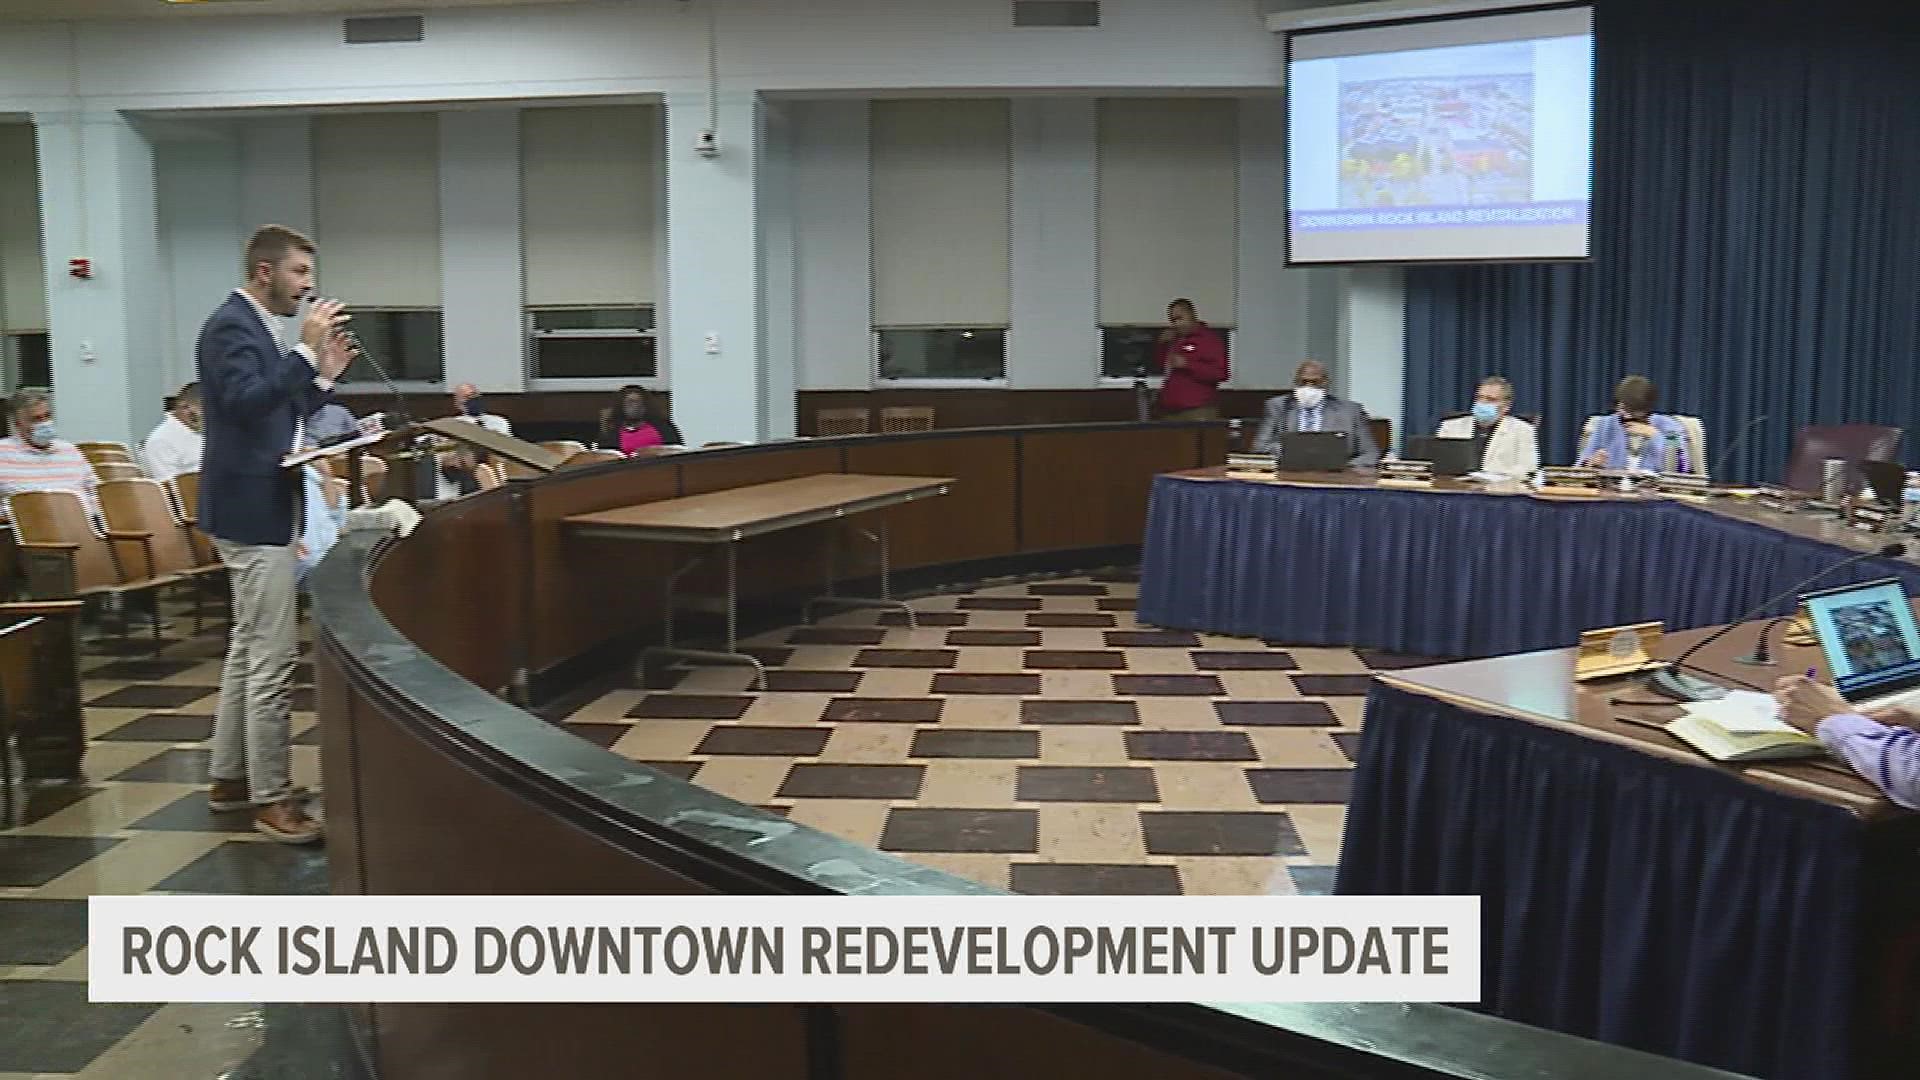 At Monday's city council meeting, a representative from the Quad Cities Chamber of Commerce updated aldermen on the project's goals and how it would be paid for.